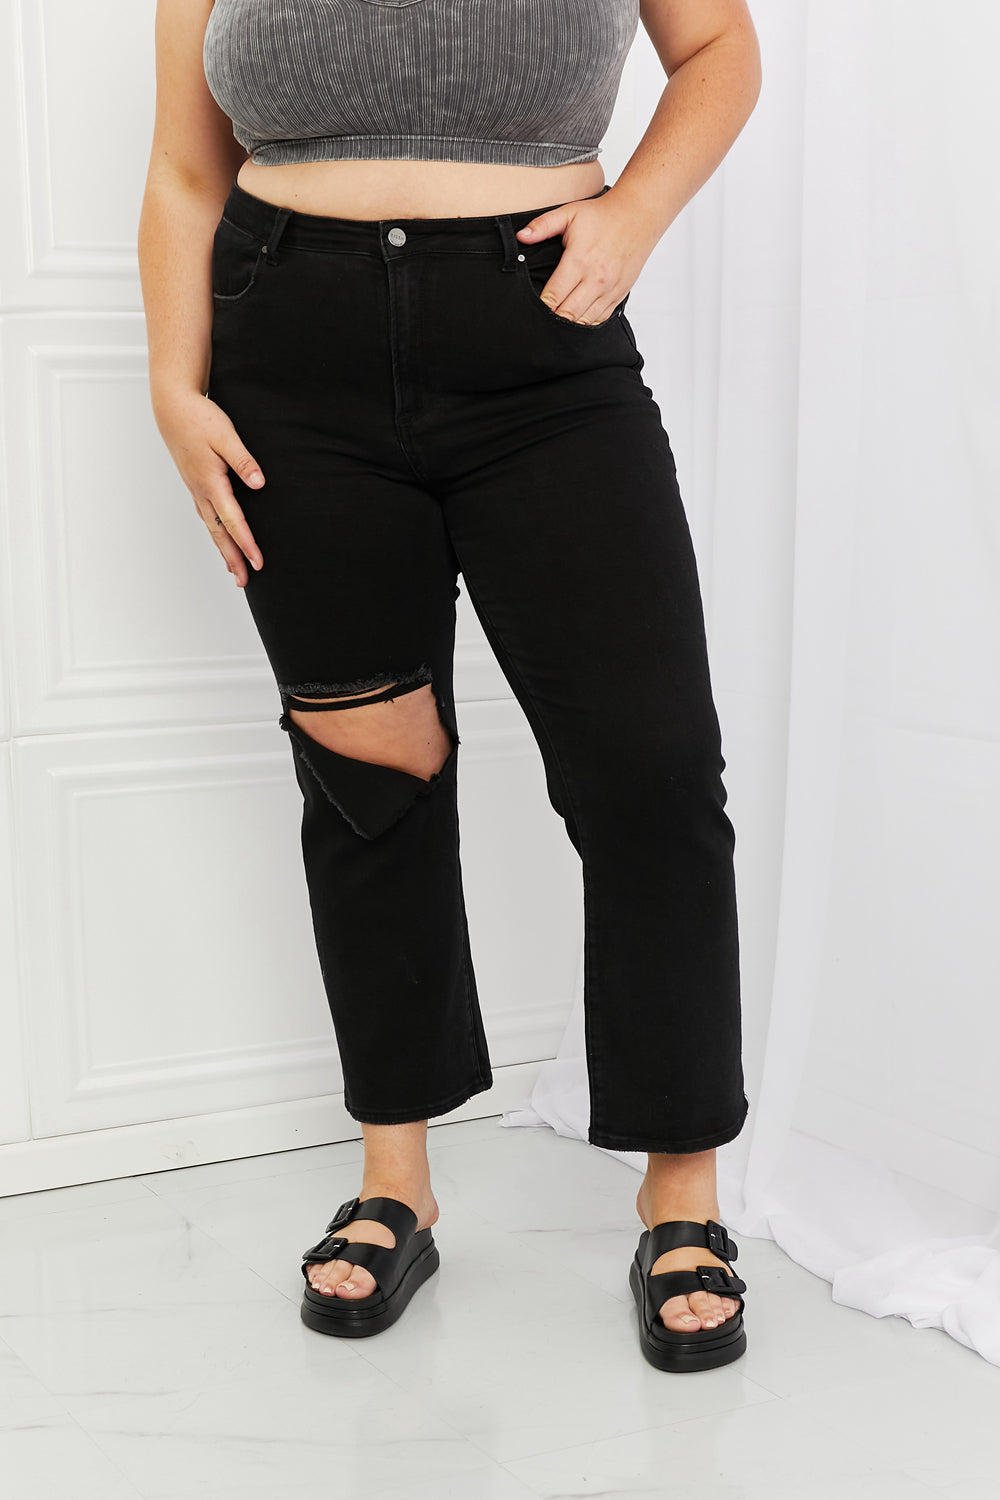 RISEN Yasmin Relaxed Distressed Jeans - Online Only